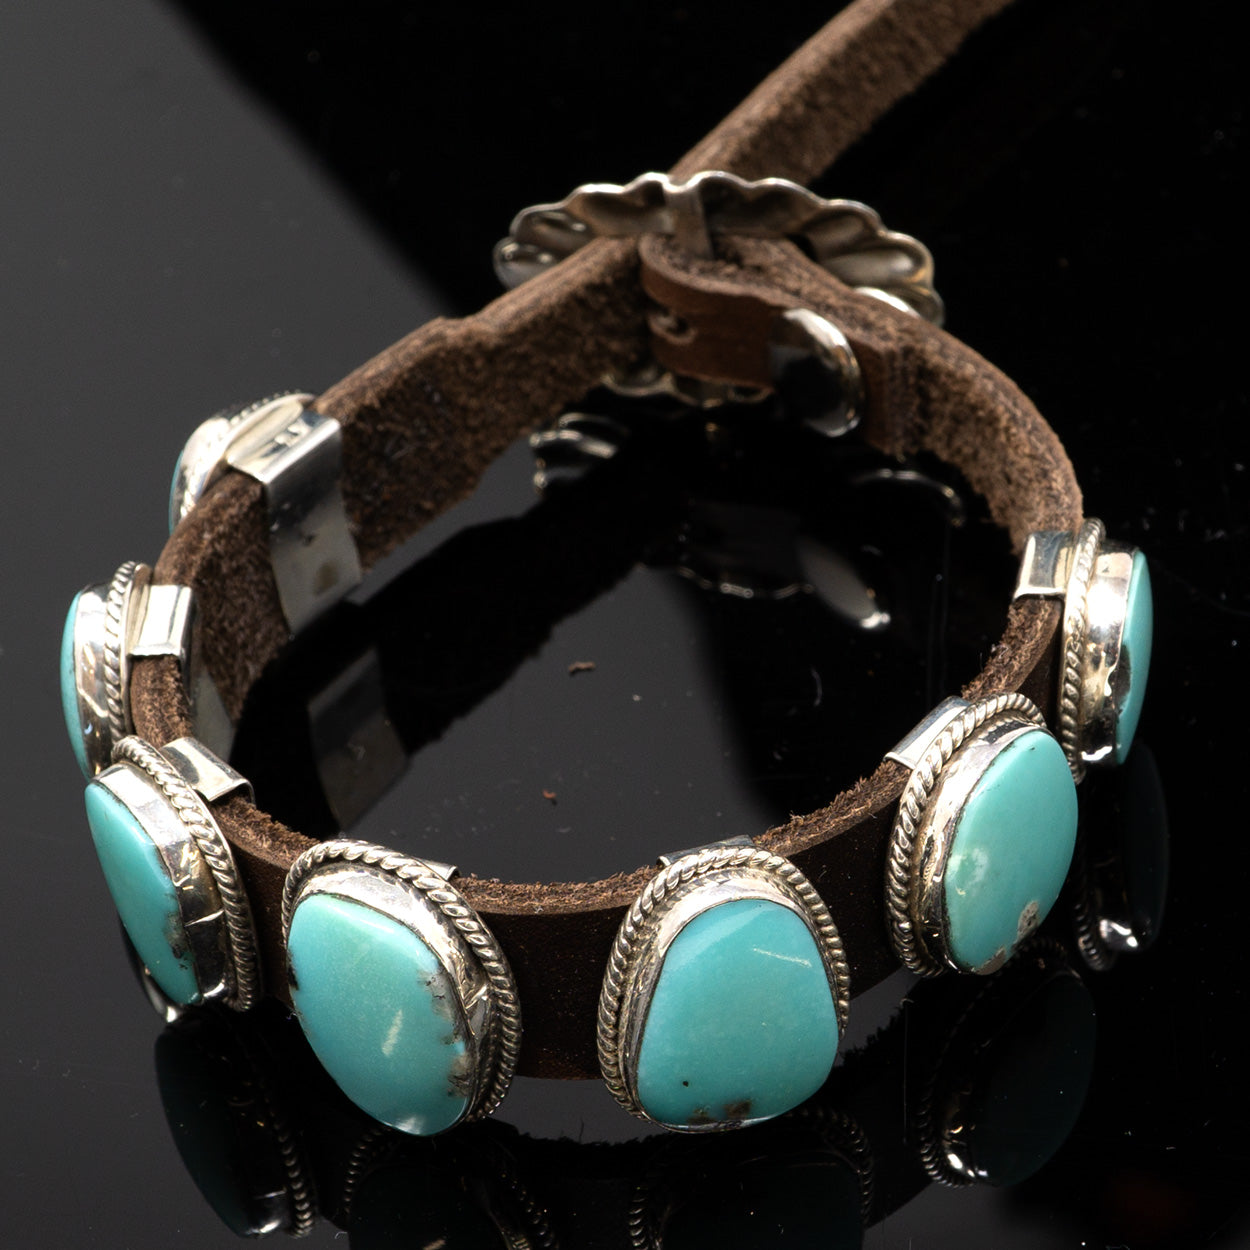 Green Kingman Turquoise Cabachons on Leather Bracelet | by Bill Willie